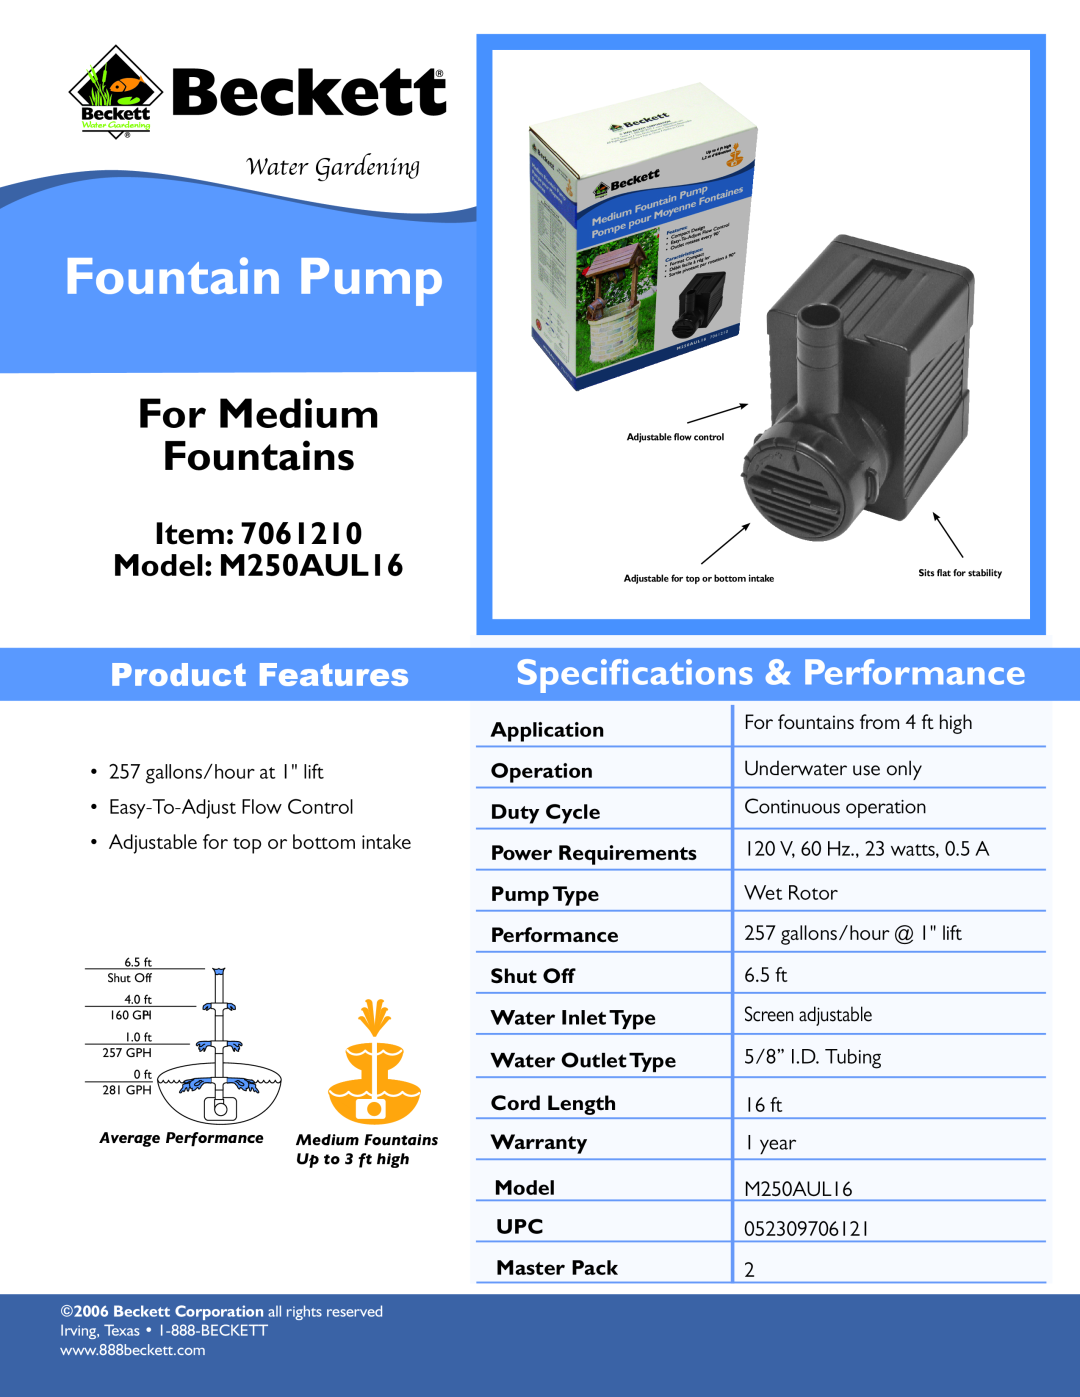 Beckett Water Gardening M250AUL16 specifications Fountain Pump, For Medium Fountains, Speciﬁcations & Performance 